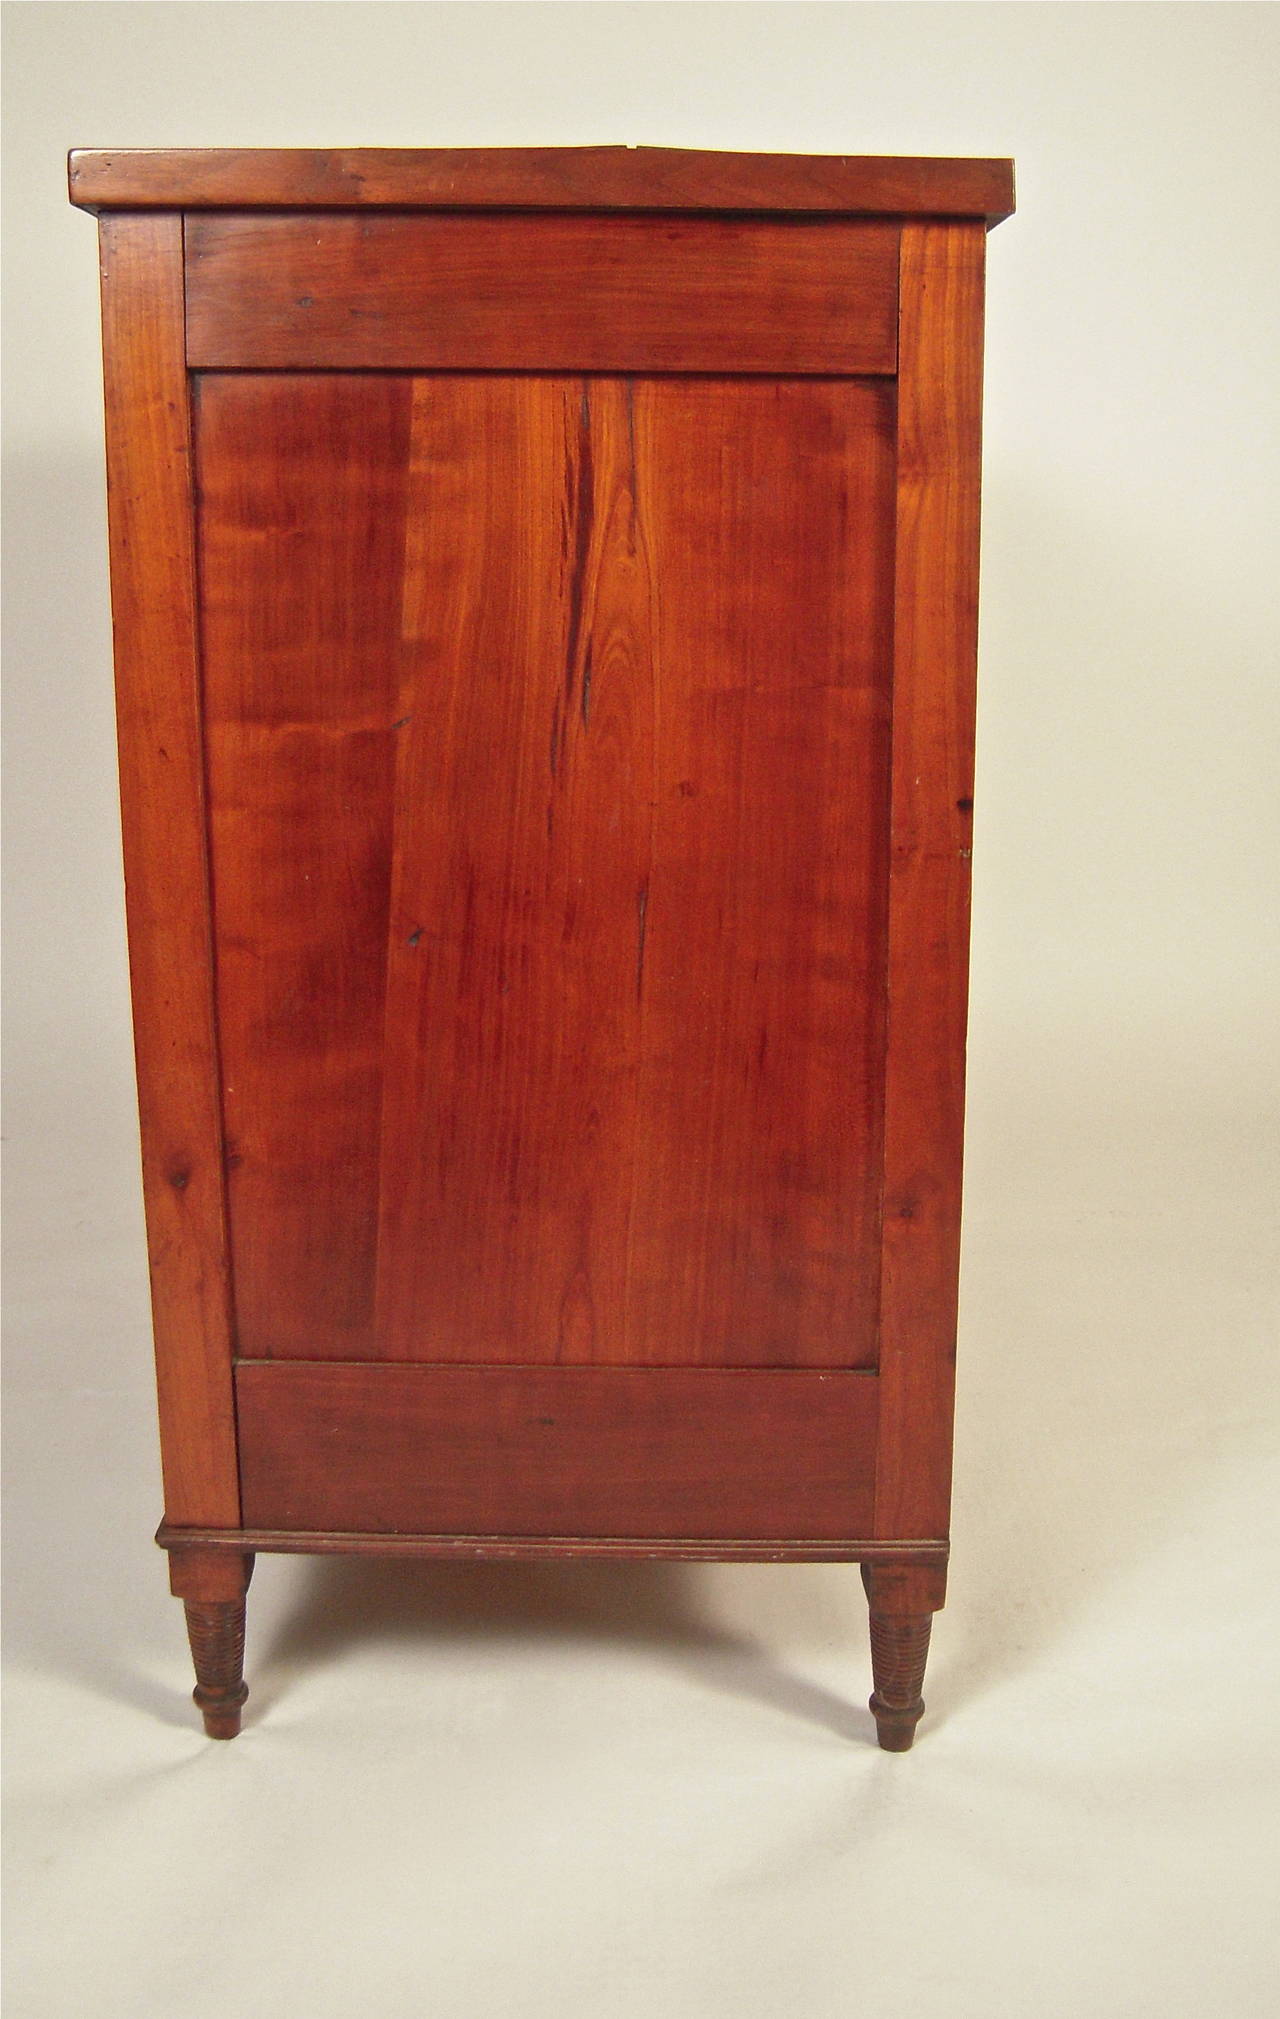 Carved Biedermeier Chest of Drawers, circa 1830